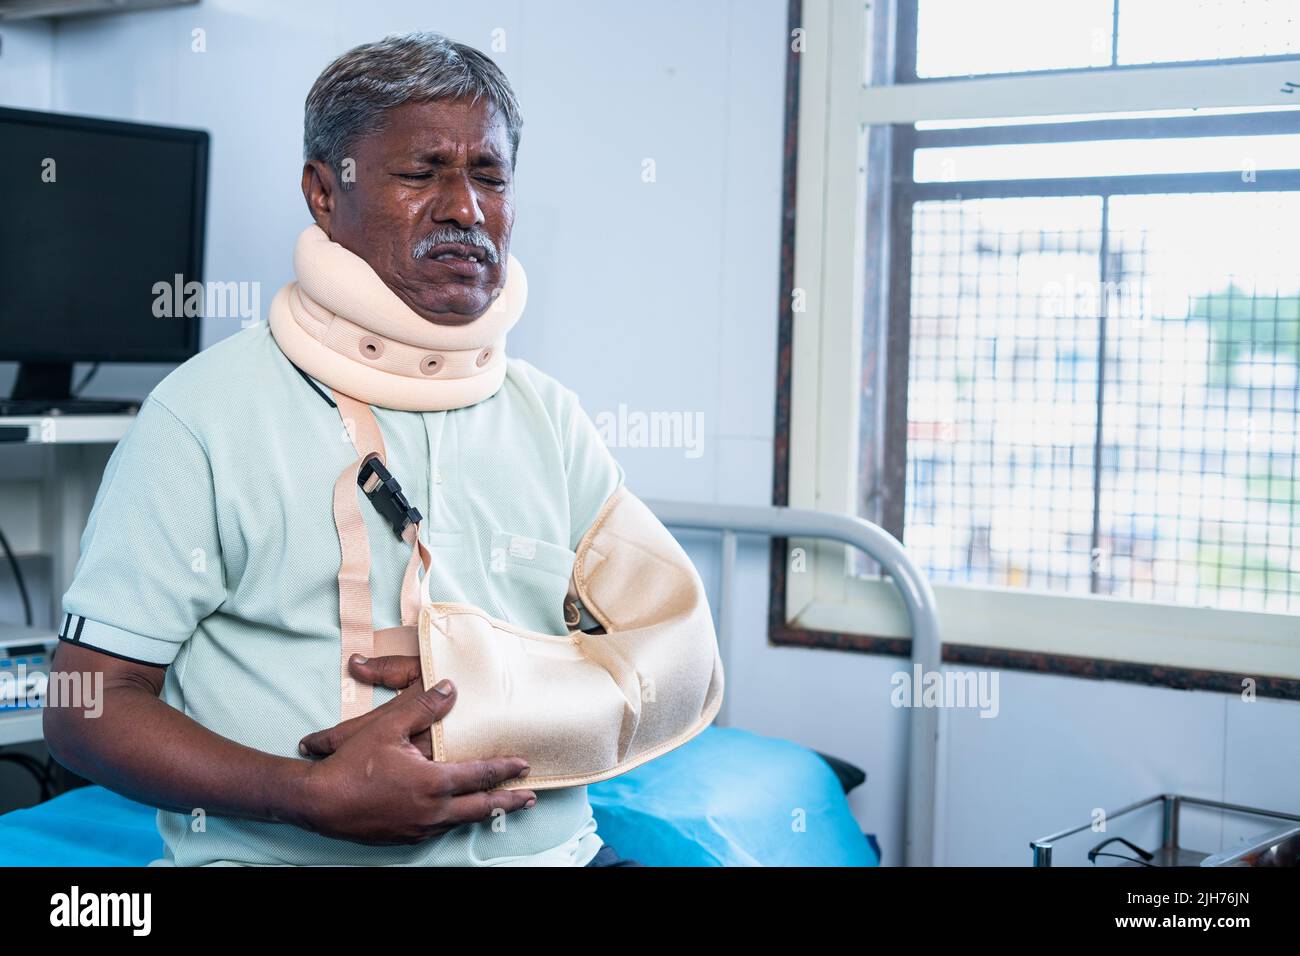 Senior man suffering from injury of neck and hand fracture while sitting on hospital bed - concept of medicare, health care treatment and safety. Stock Photo